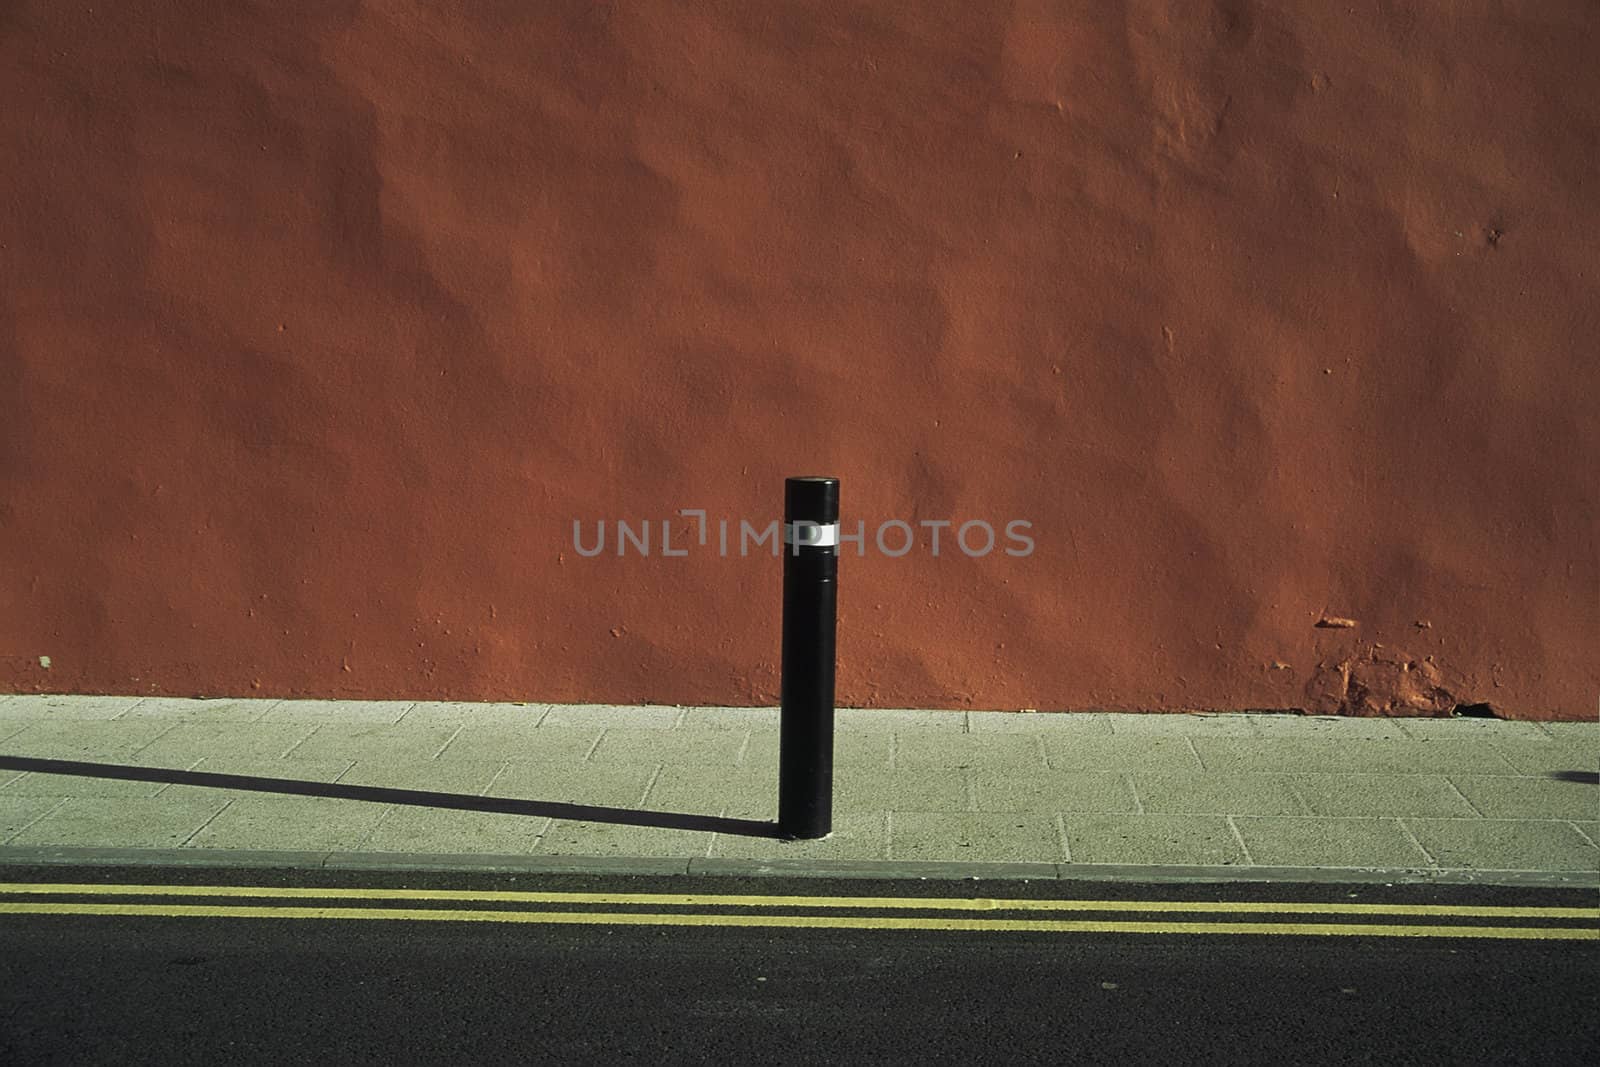 An urban abstract with road, pavement, yellow lines, orange dappled wall and a post with a shadow.